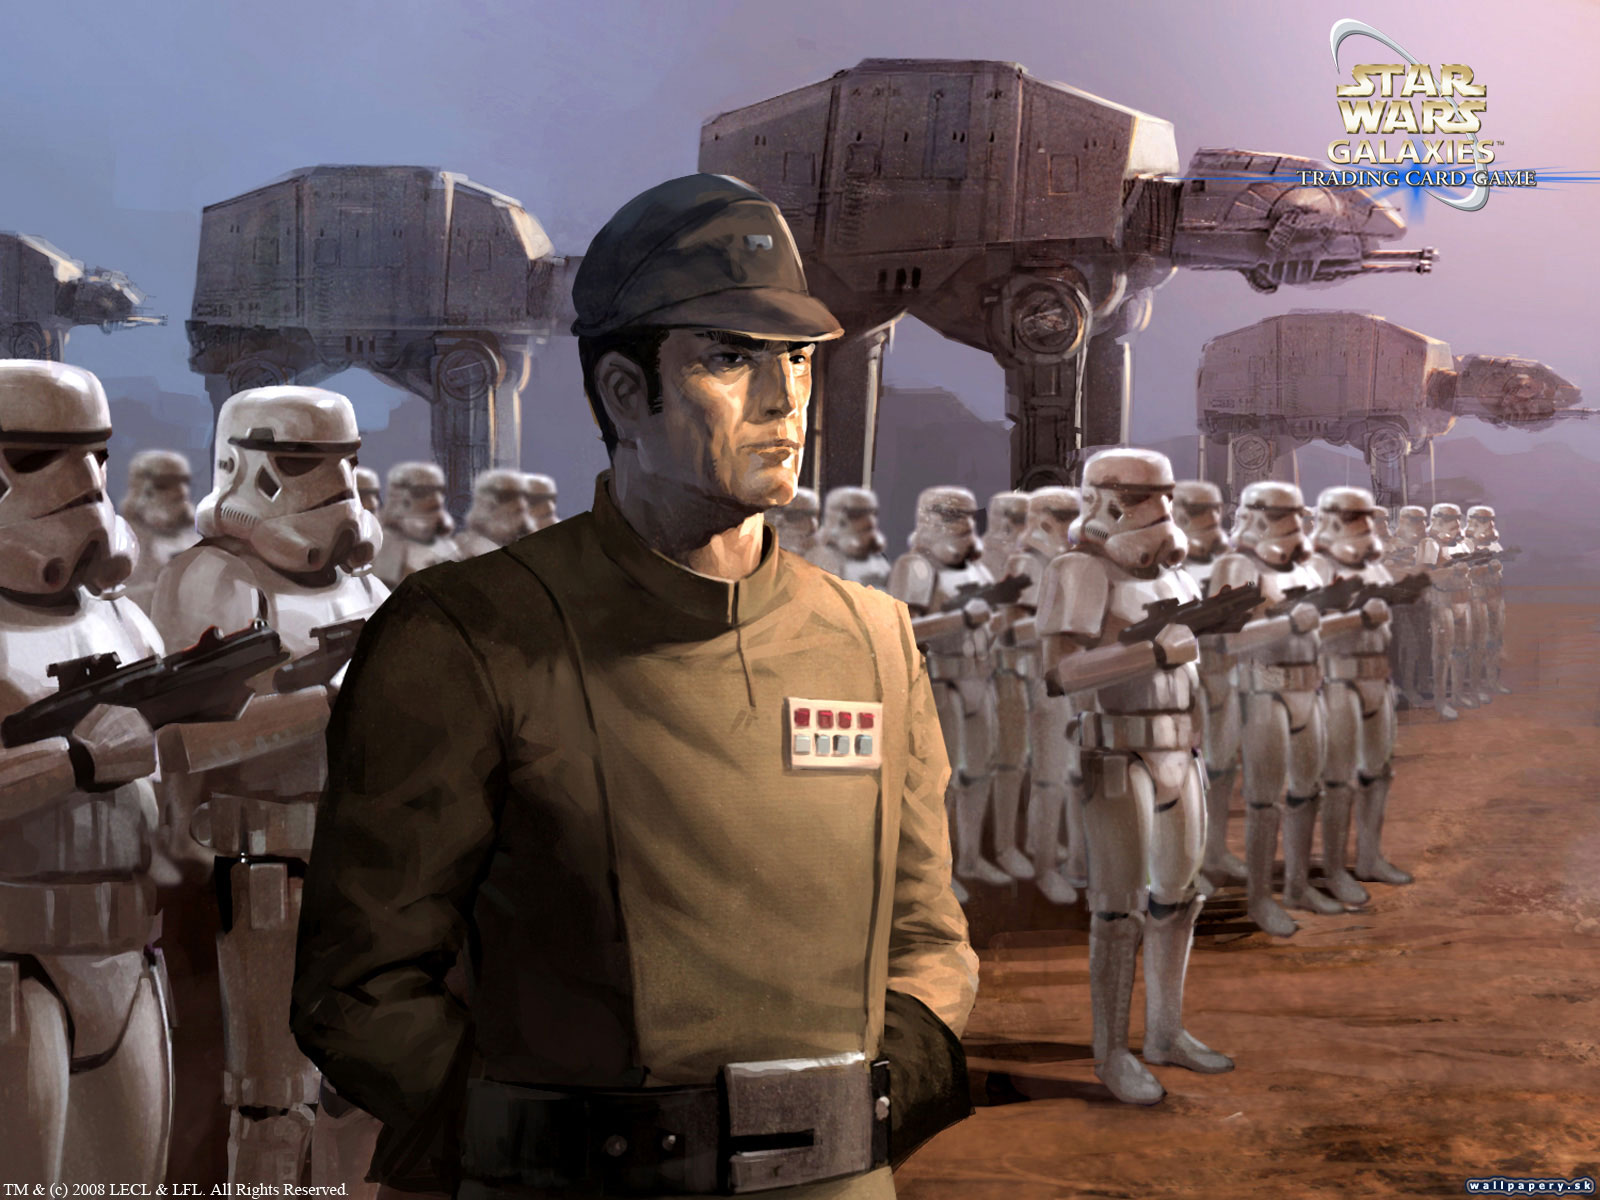 Star Wars Galaxies - Trading Card Game: Champions of the Force - wallpaper 21